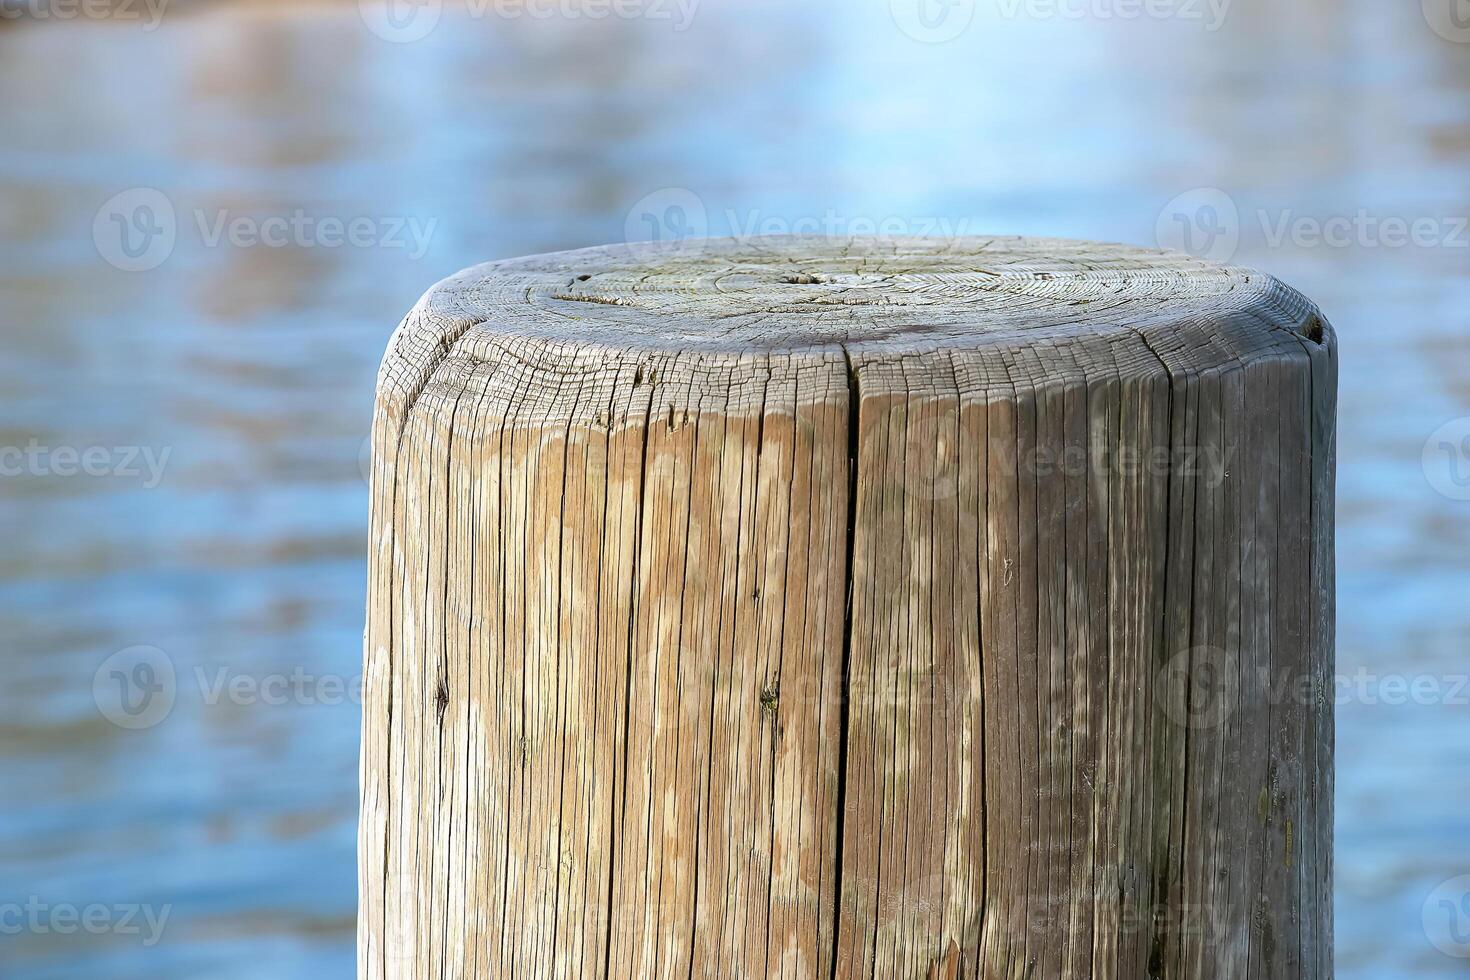 A pier made of wooden piles for mooring boats and maintaining the stability of the pier against the backdrop of water Lake Traunsee in Austria. photo